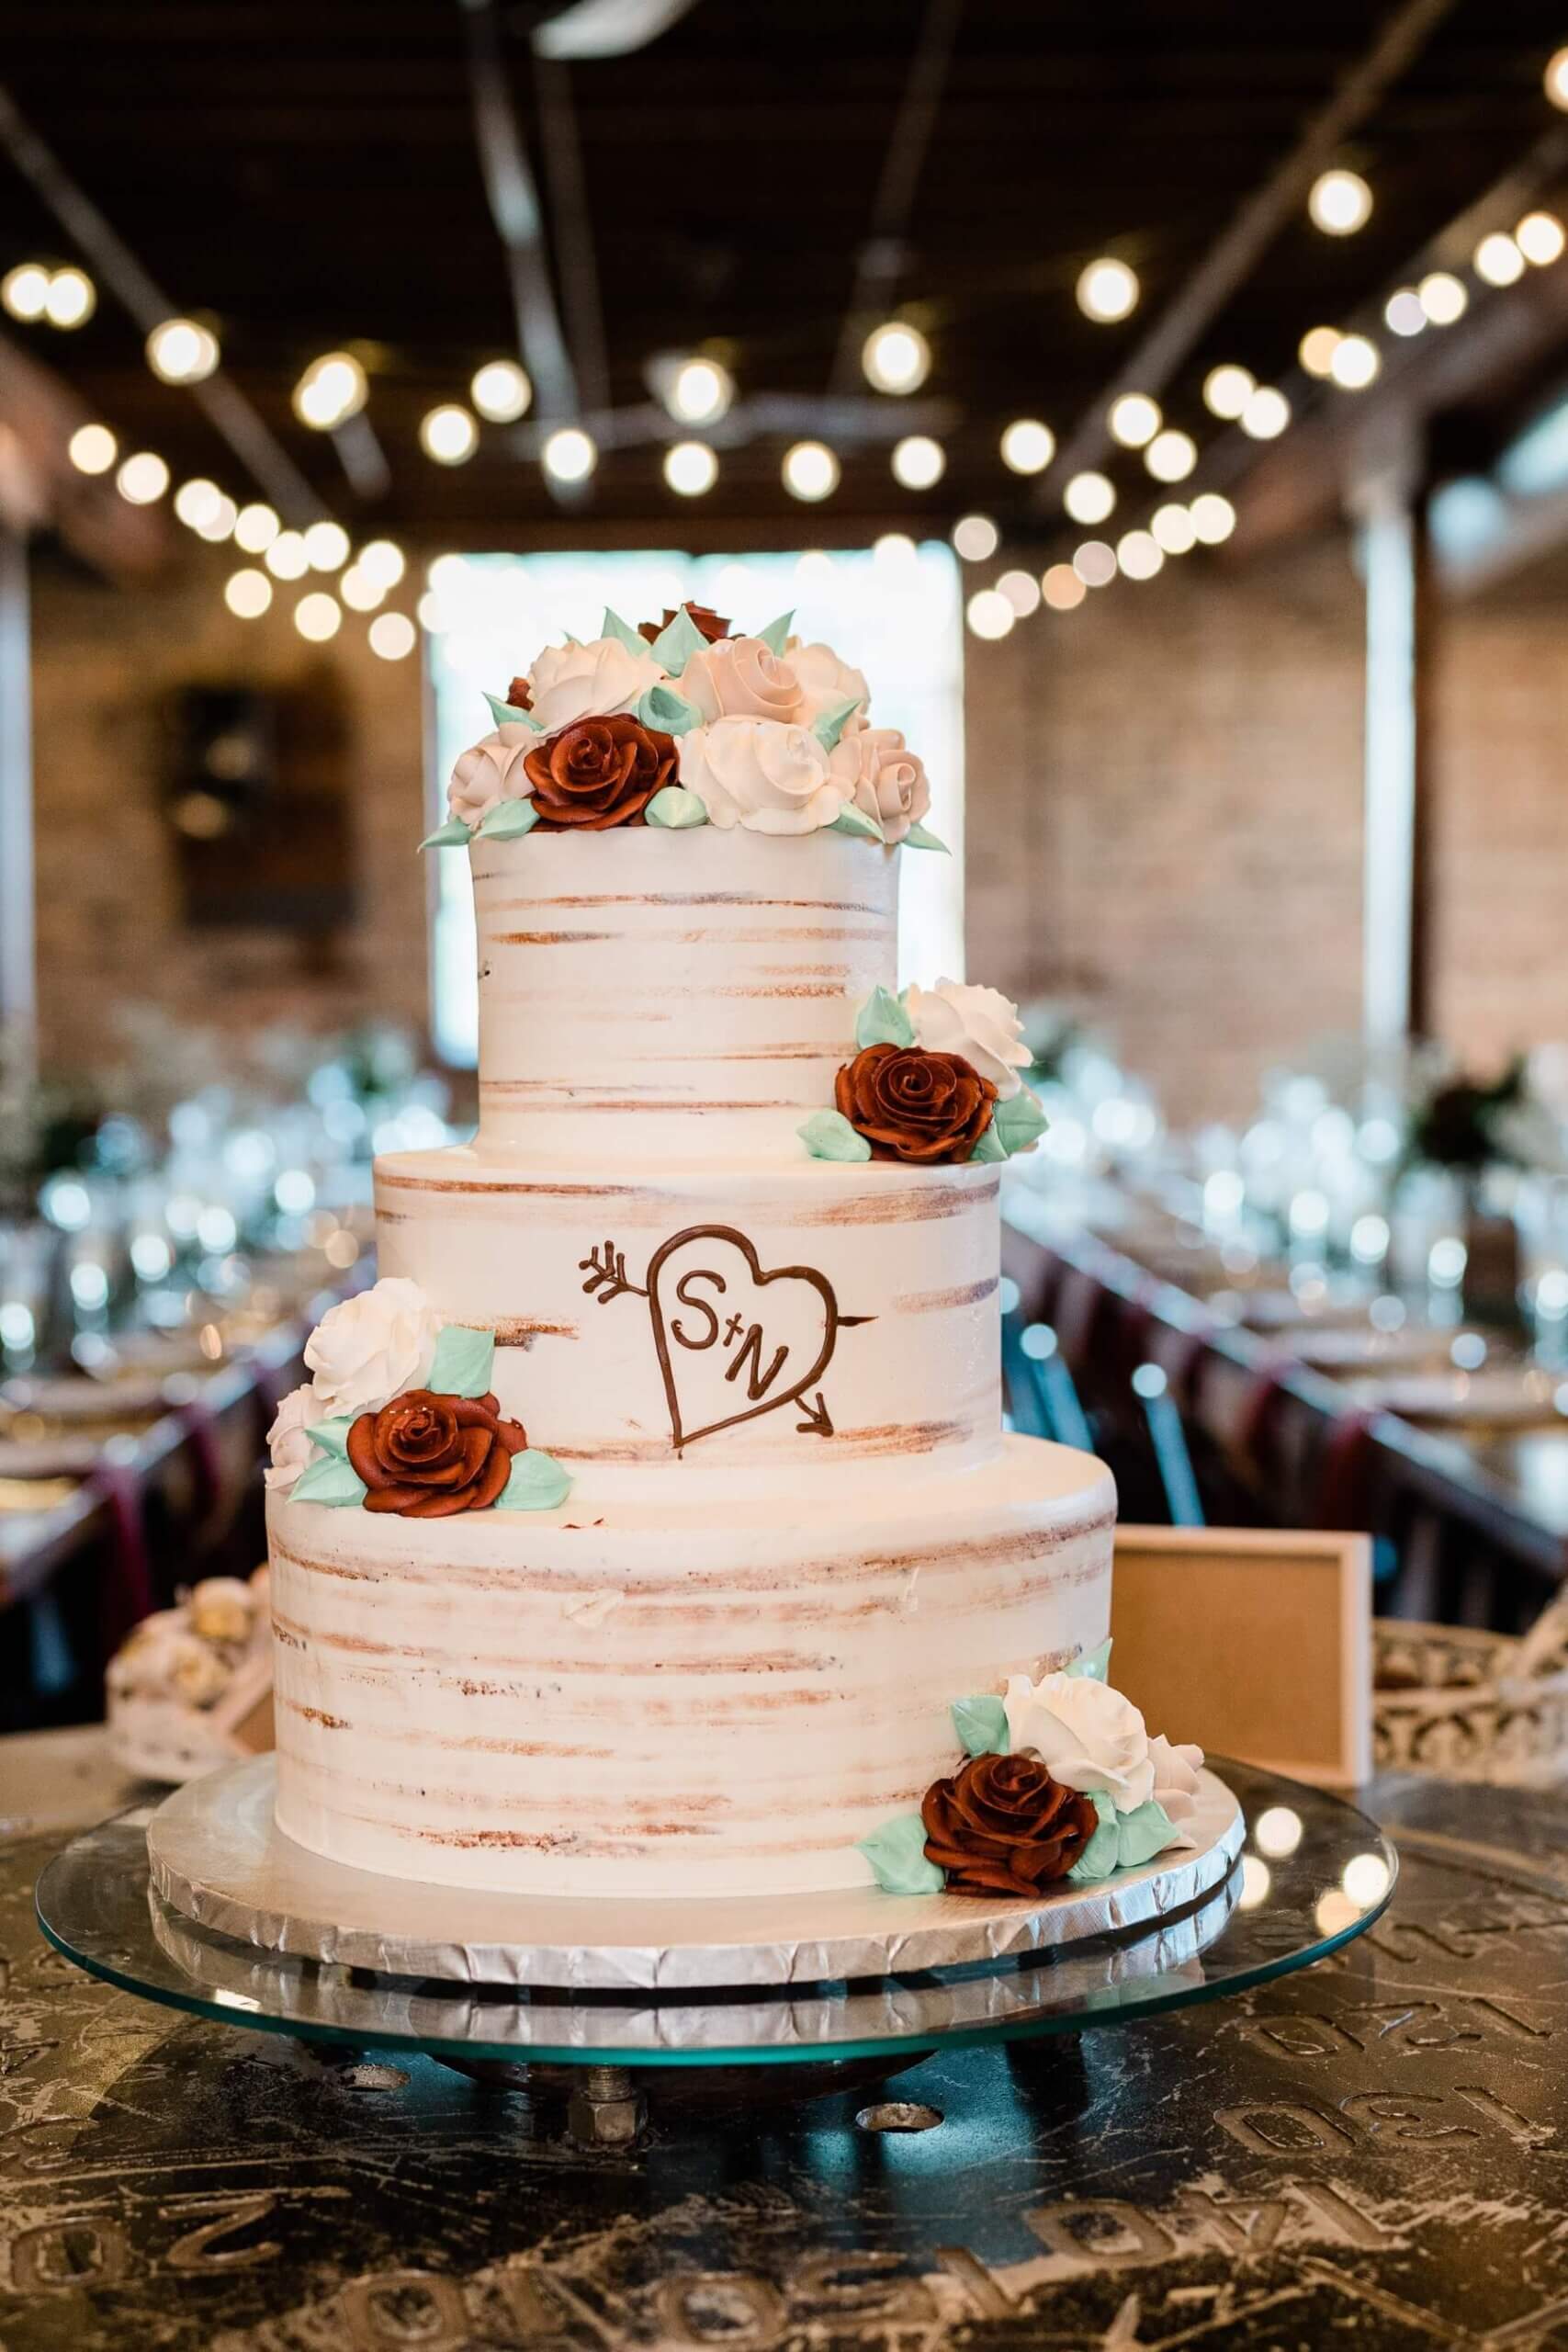 Three tier wedding cake designed like a tree with couple's initials carved in it